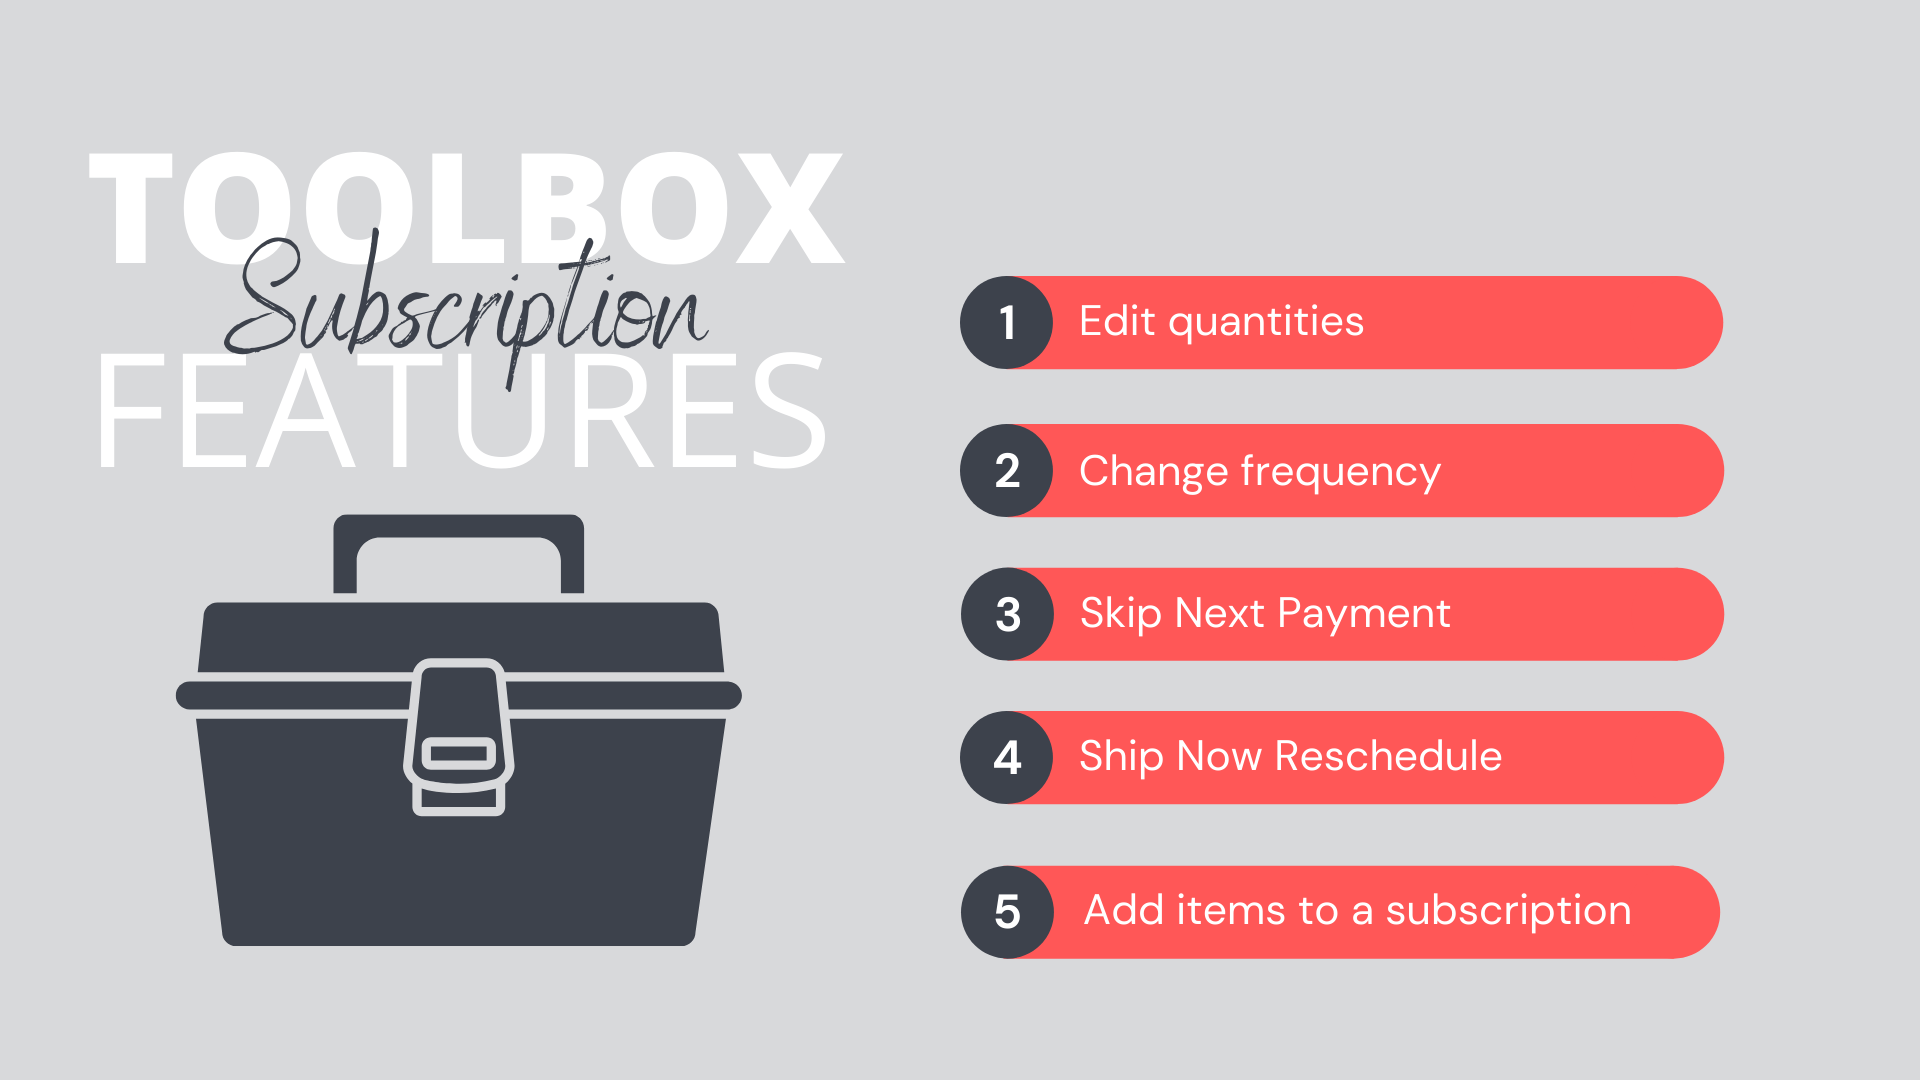 Toolbox for Subscription Features